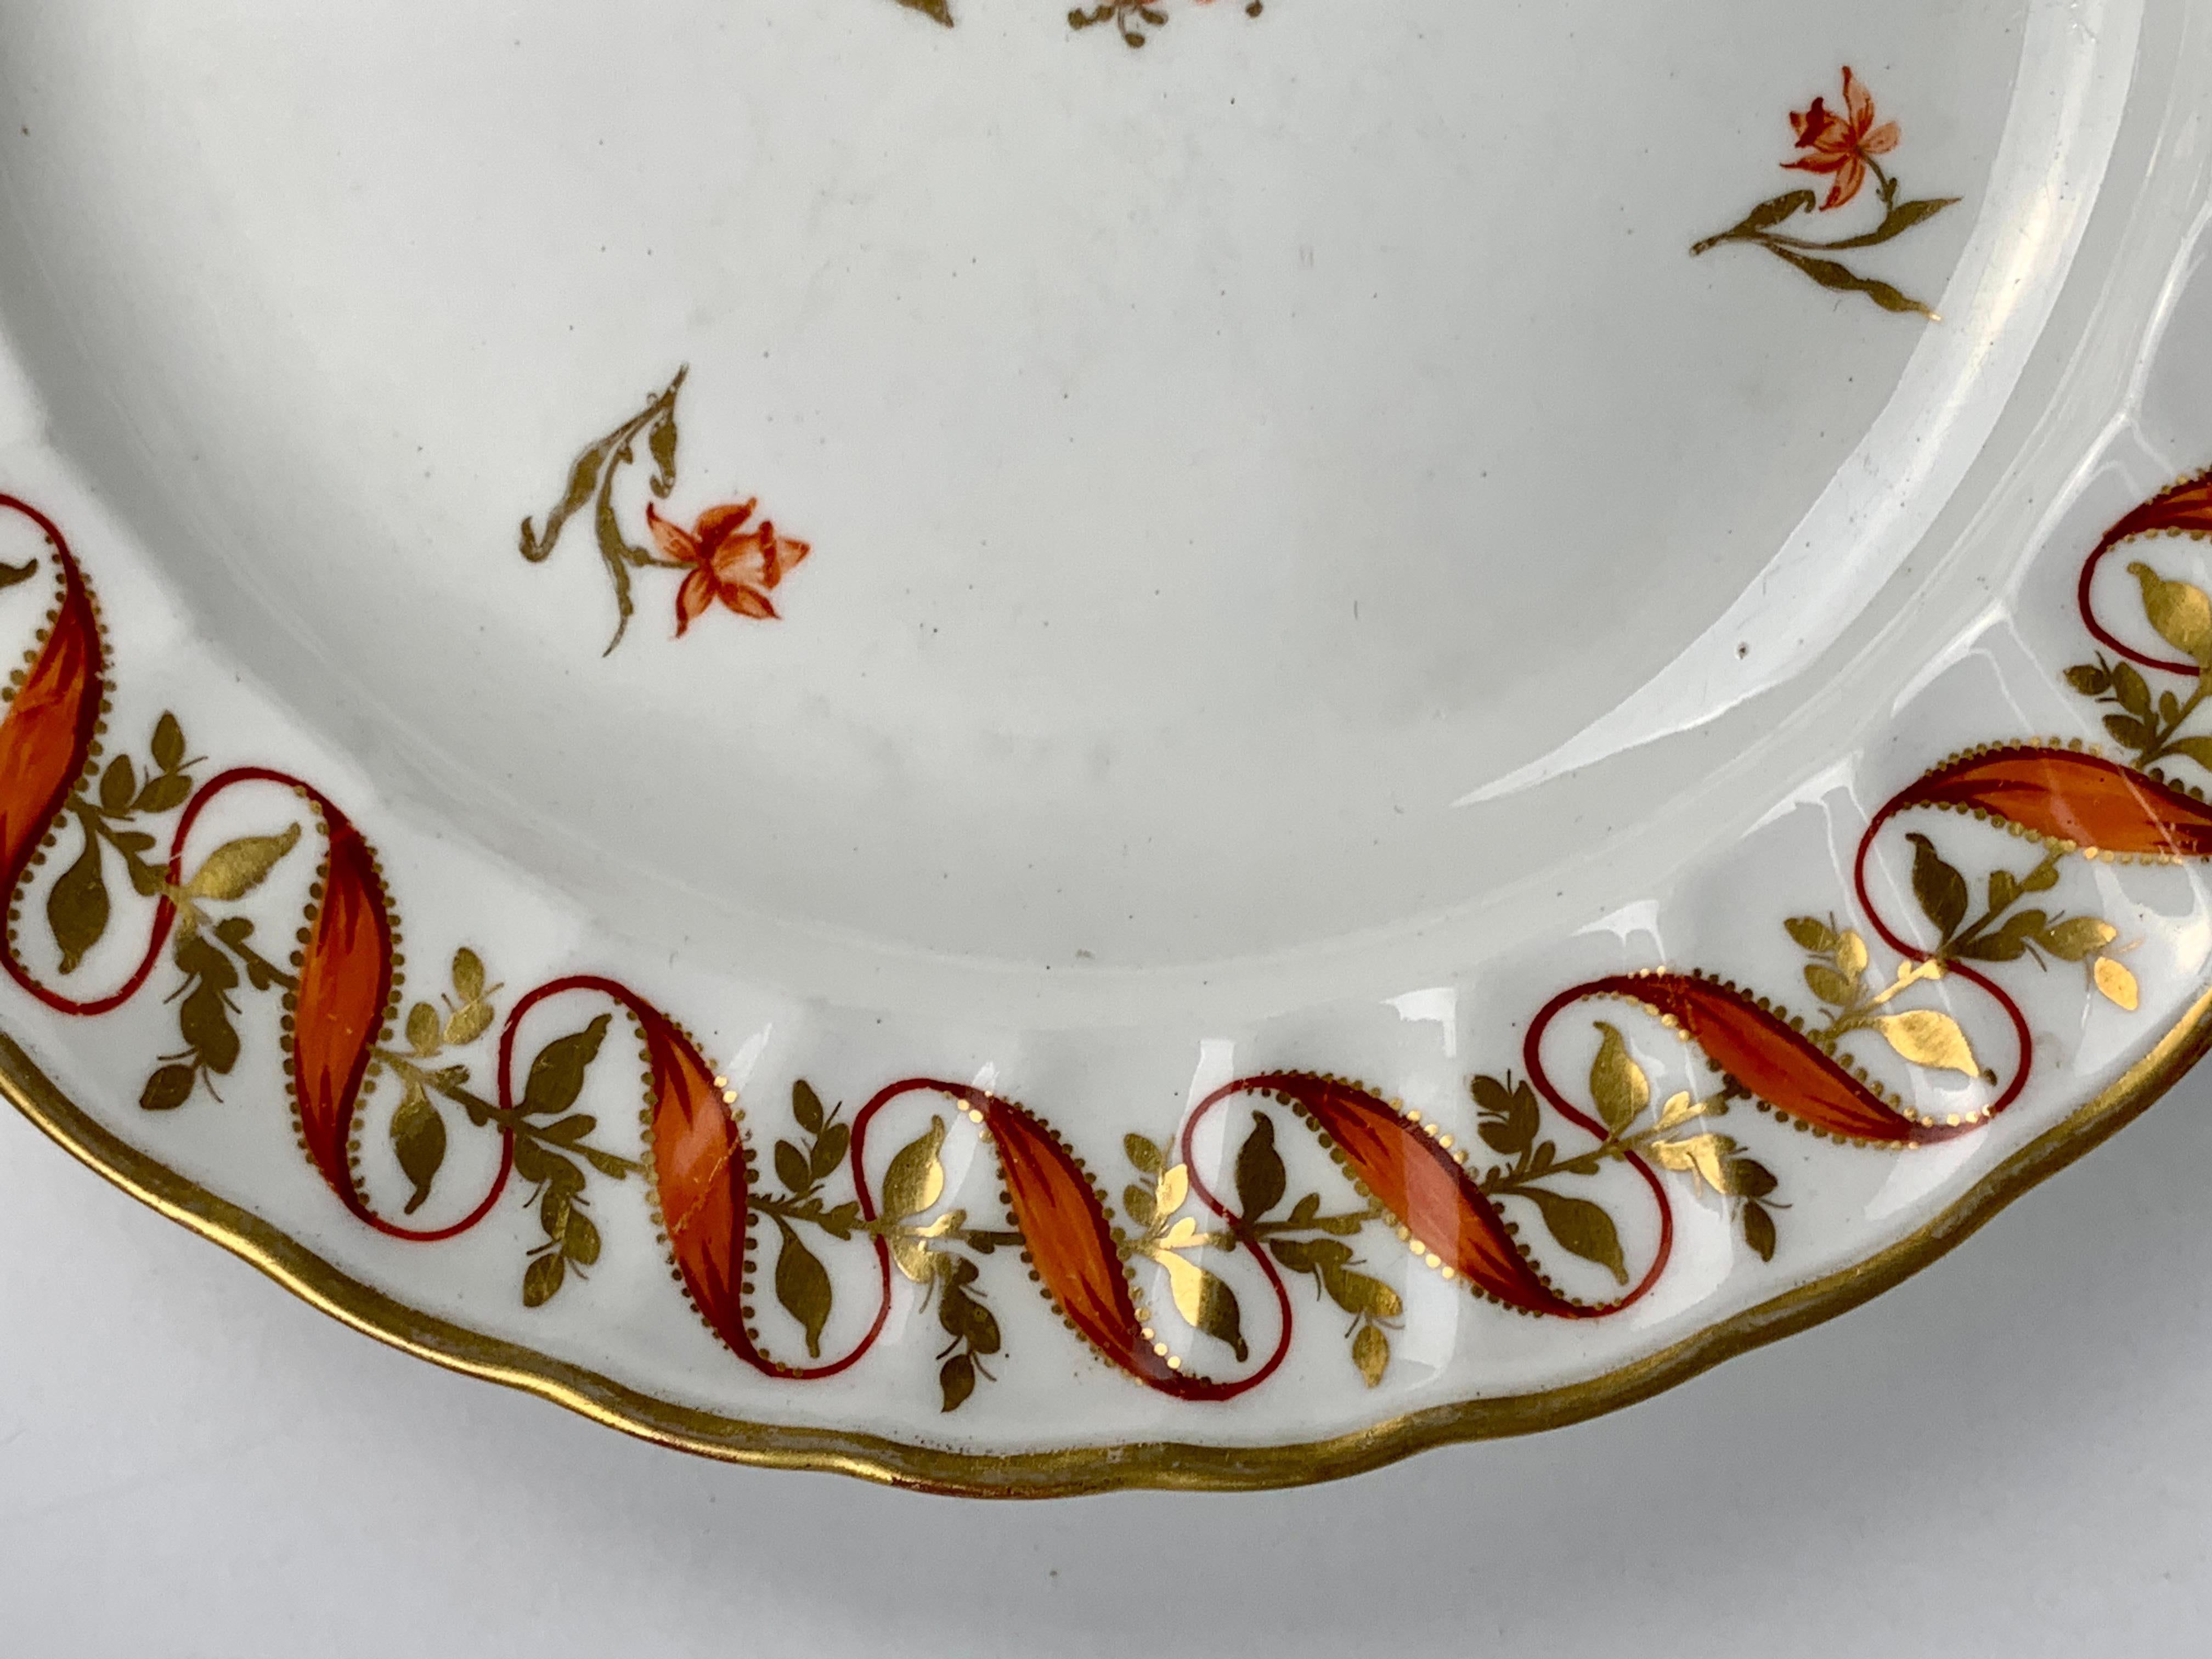 Set Four Antique Porcelain Dishes Hand-Painted 18th Century England, circa 1790 For Sale 2